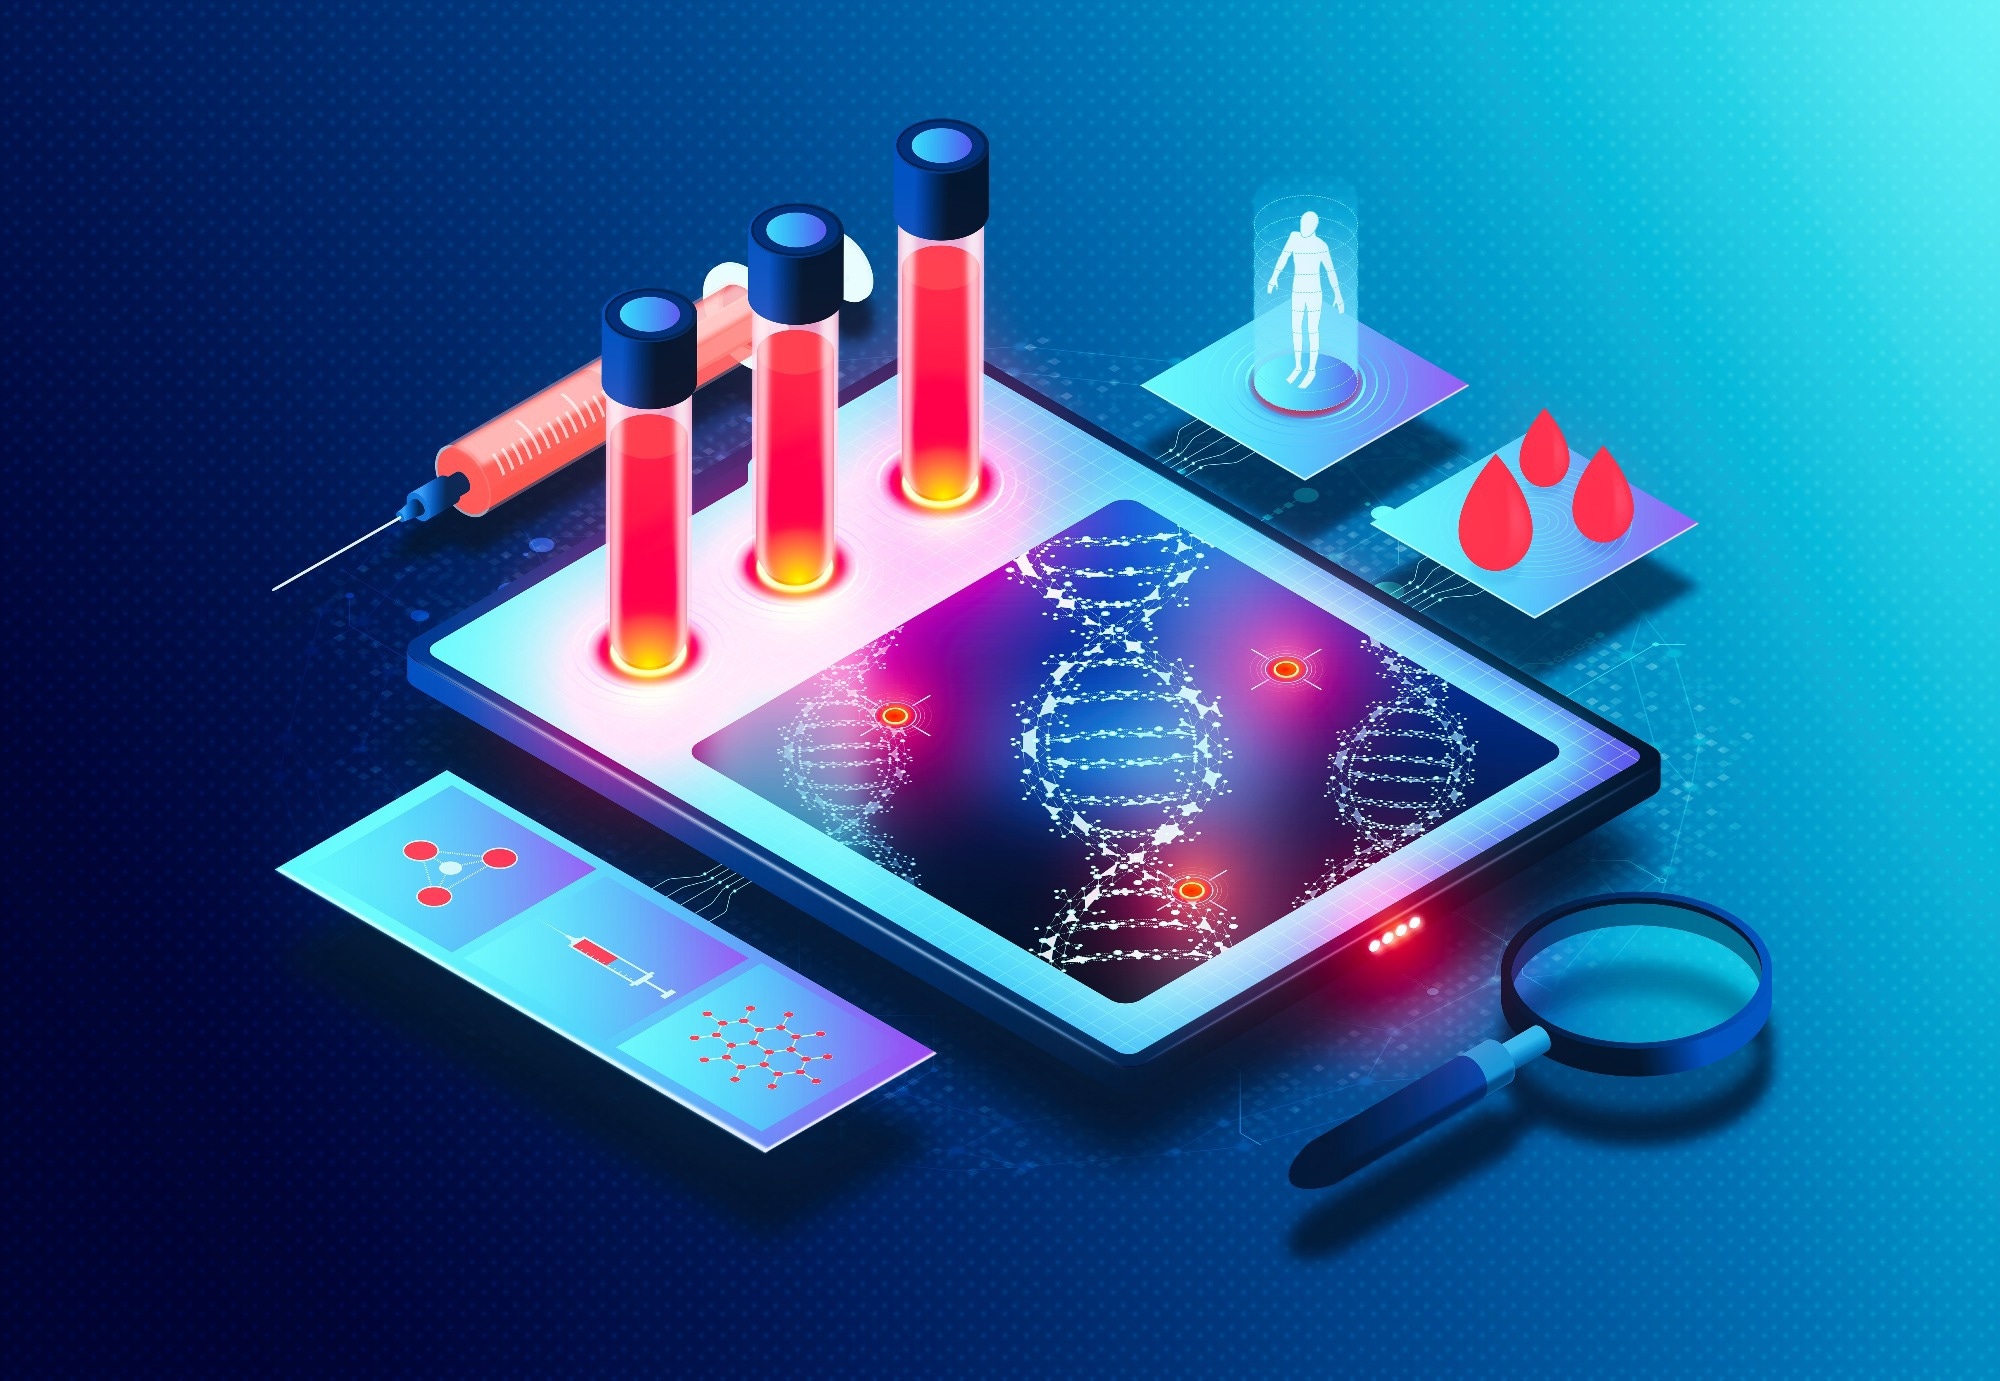 Study: Impact of metagenomic next-generation sequencing of plasma cell-free DNA testing in the management of patients with suspected infectious diseases. Image Credit: ArtemisDiana/Shutterstock.com